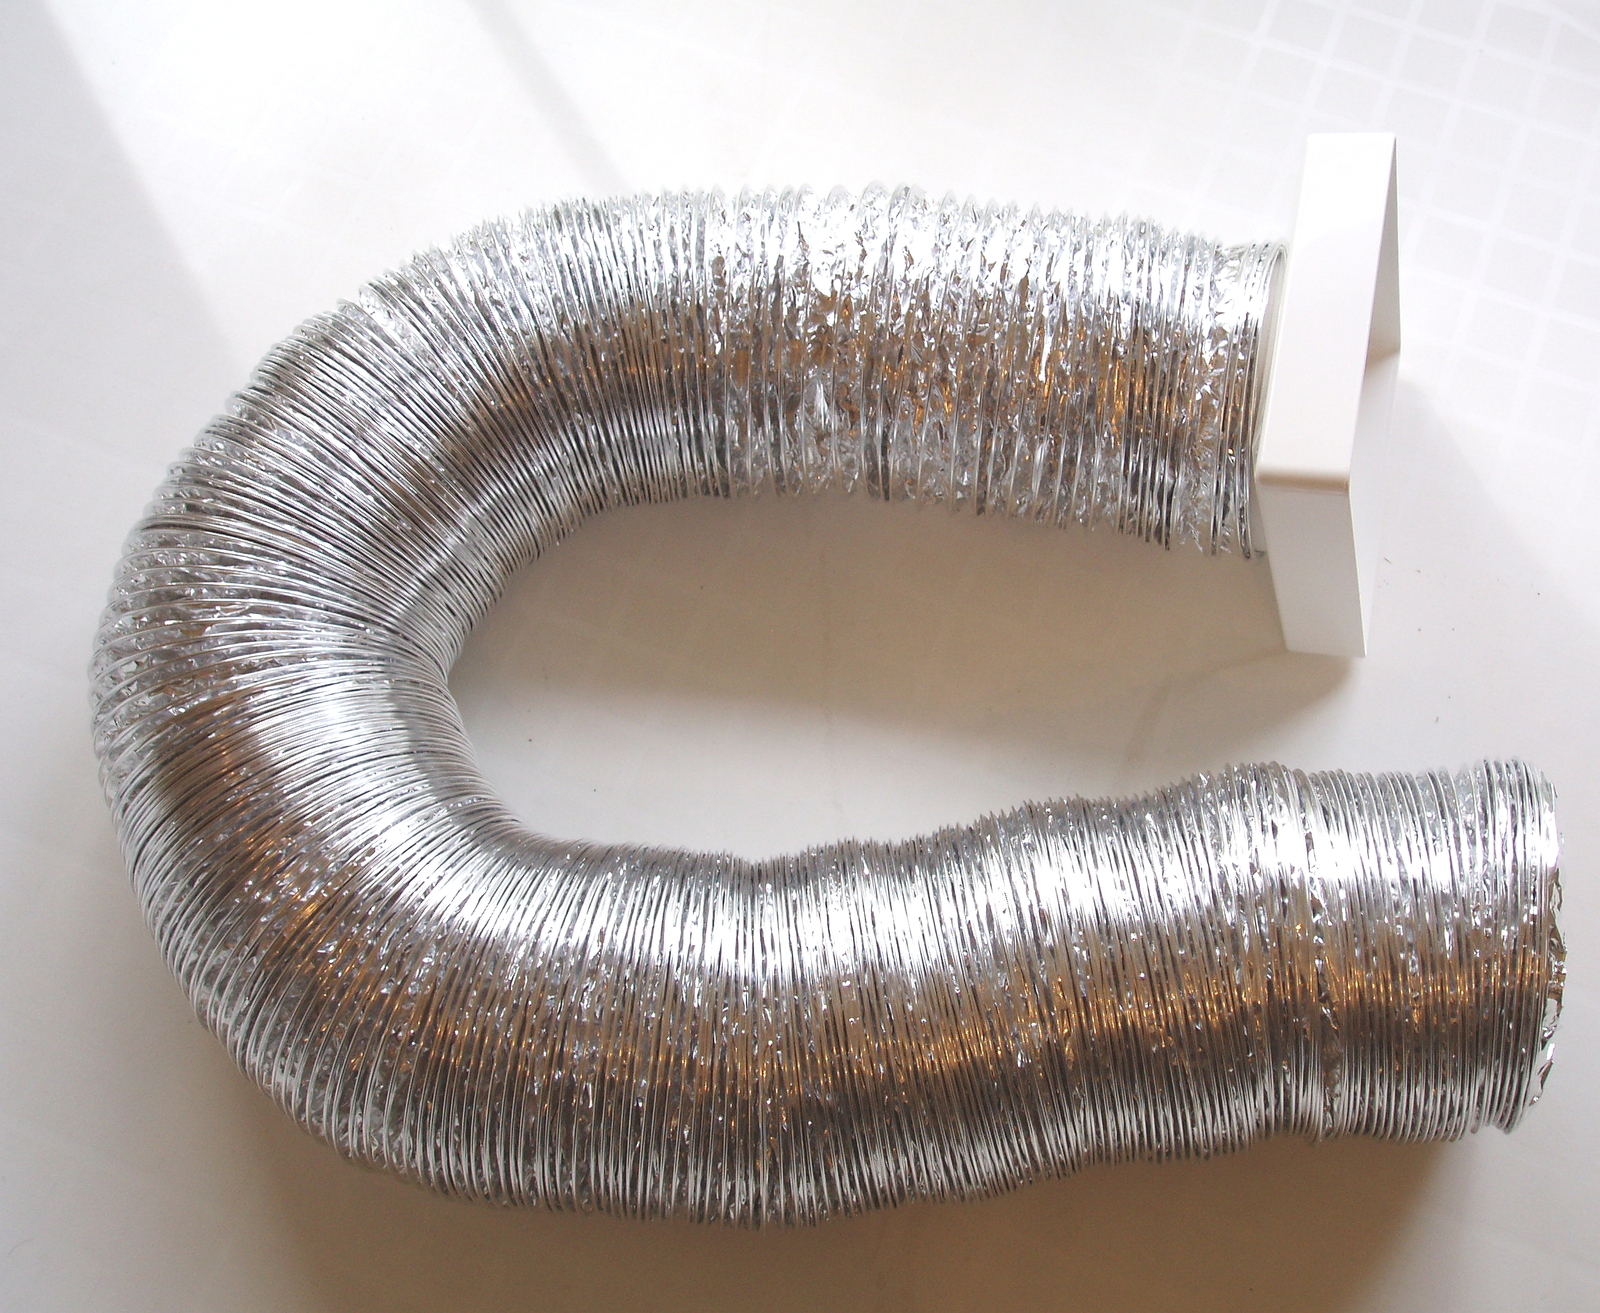 20' Flexible Aluminium foil duct for use with Ozone Generator Ozonator Air Purif - $49.00